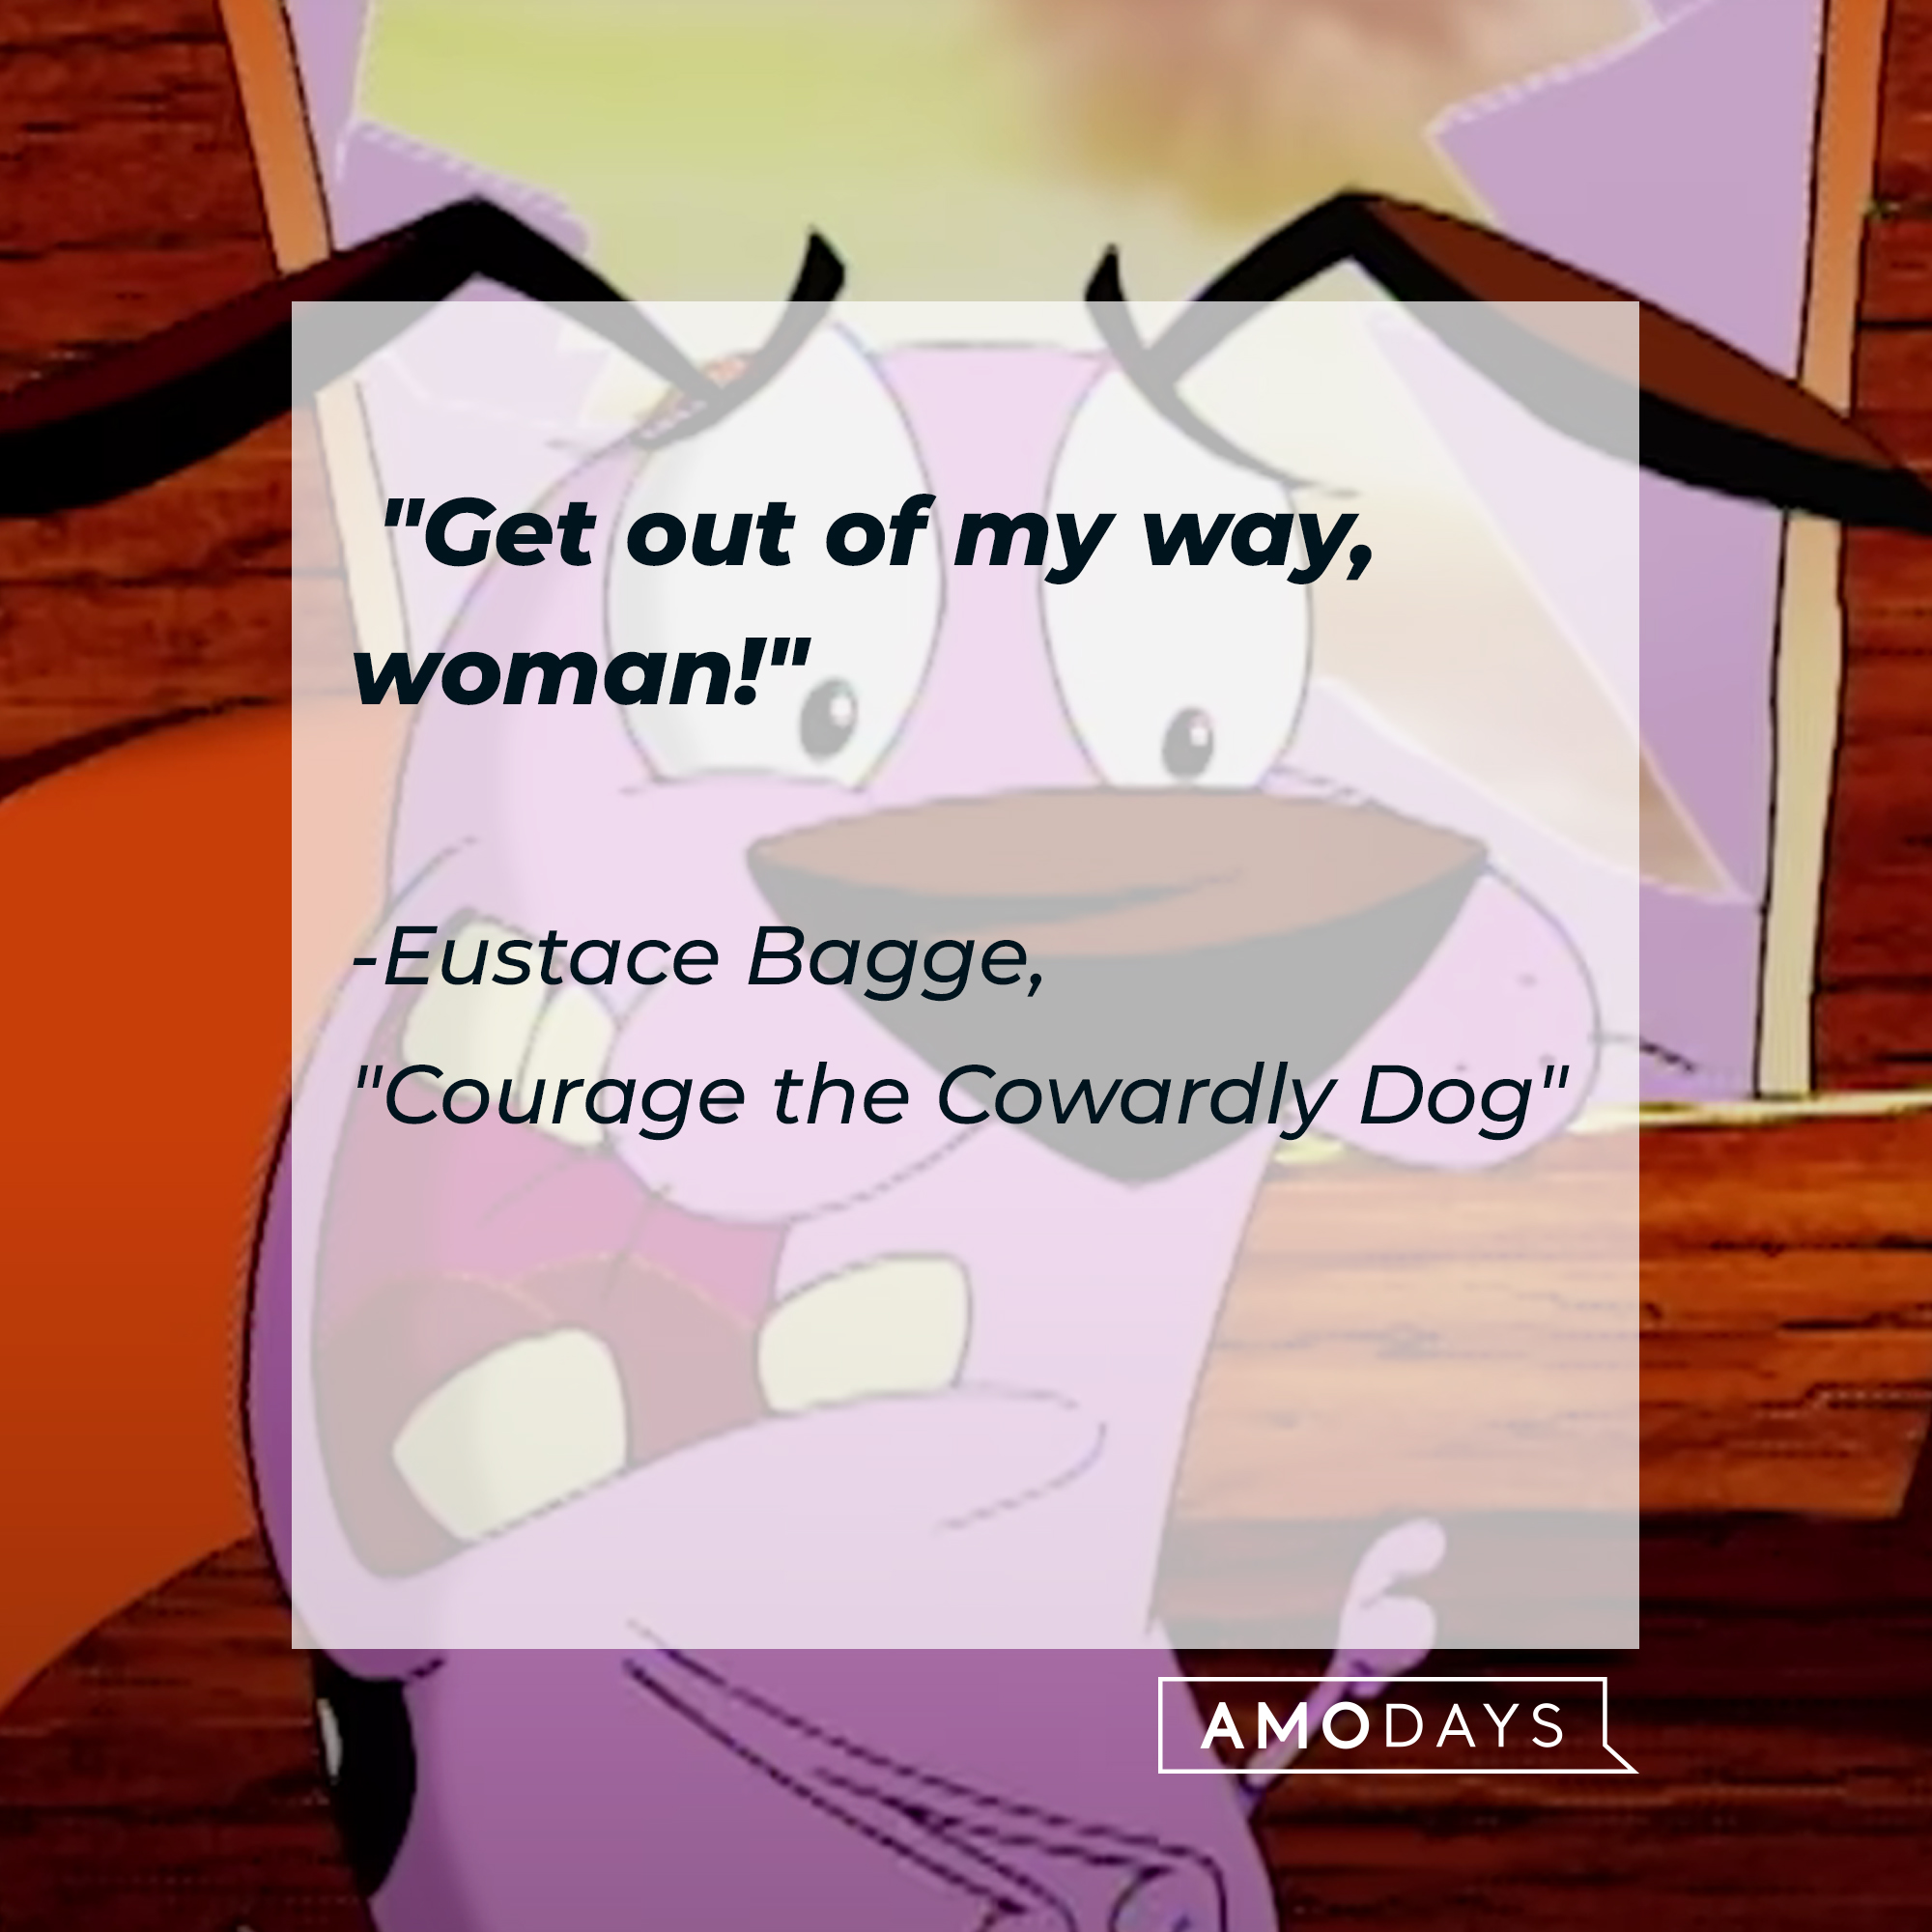 Eustace's quote: "Get out of my way, woman!" | Source: Facebook.com/CartoonNetwork